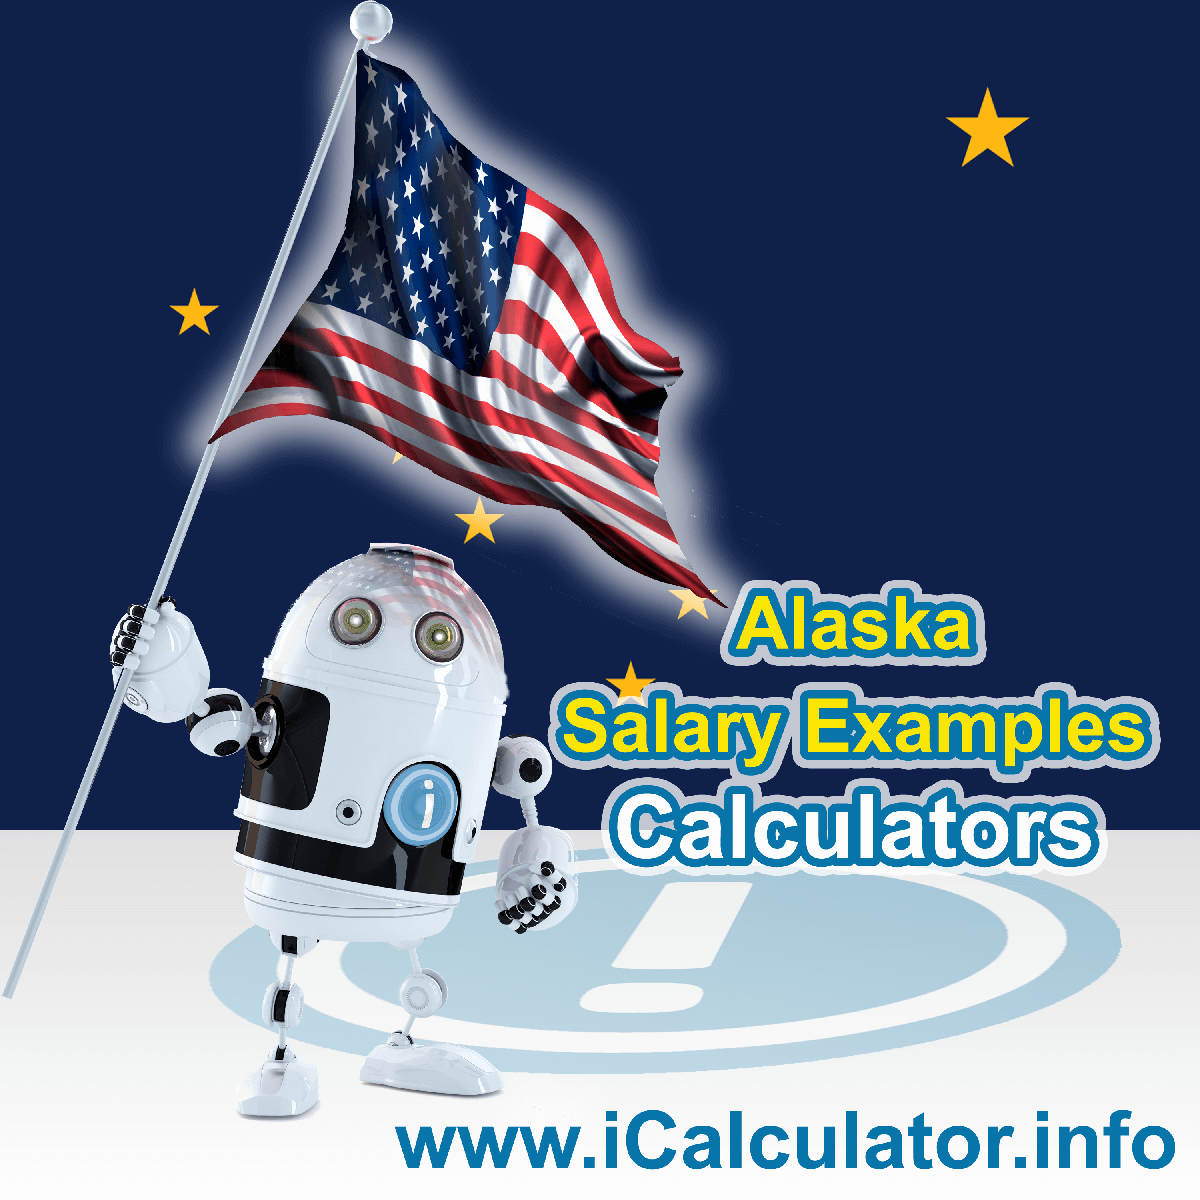 Alaska Salary Example for $ 145,000.00 in 2023 | iCalculator™ | $ 145,000.00 salary example for employee and employer paying Alaska State tincome taxes. Detailed salary after tax calculation including Alaska State Tax, Federal State Tax, Medicare Deductions, Social Security, Capital Gains and other income tax and salary deductions complete with supporting Alaska state tax tables 